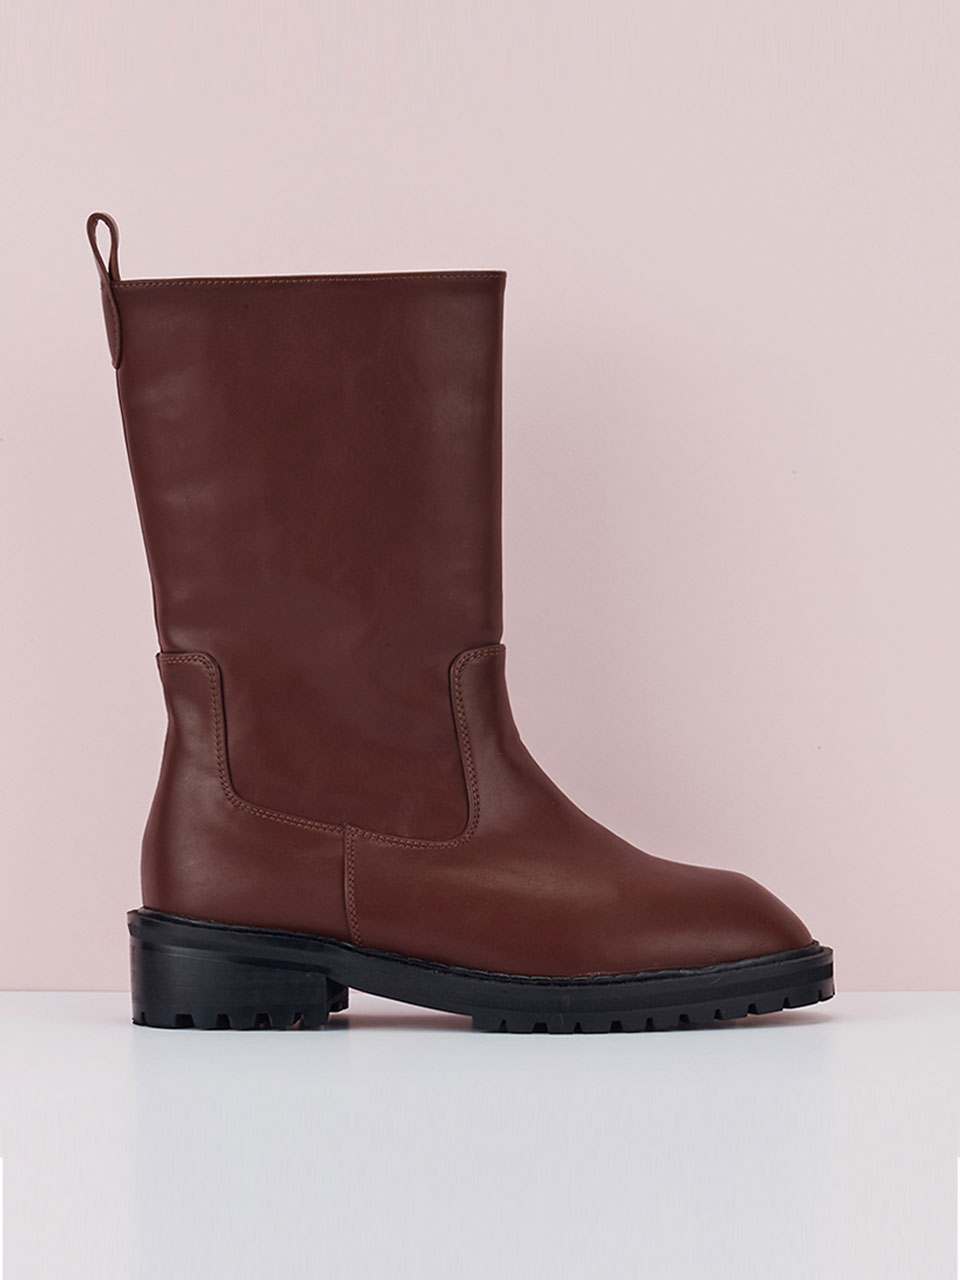 Classic Middle Boots (Brown)